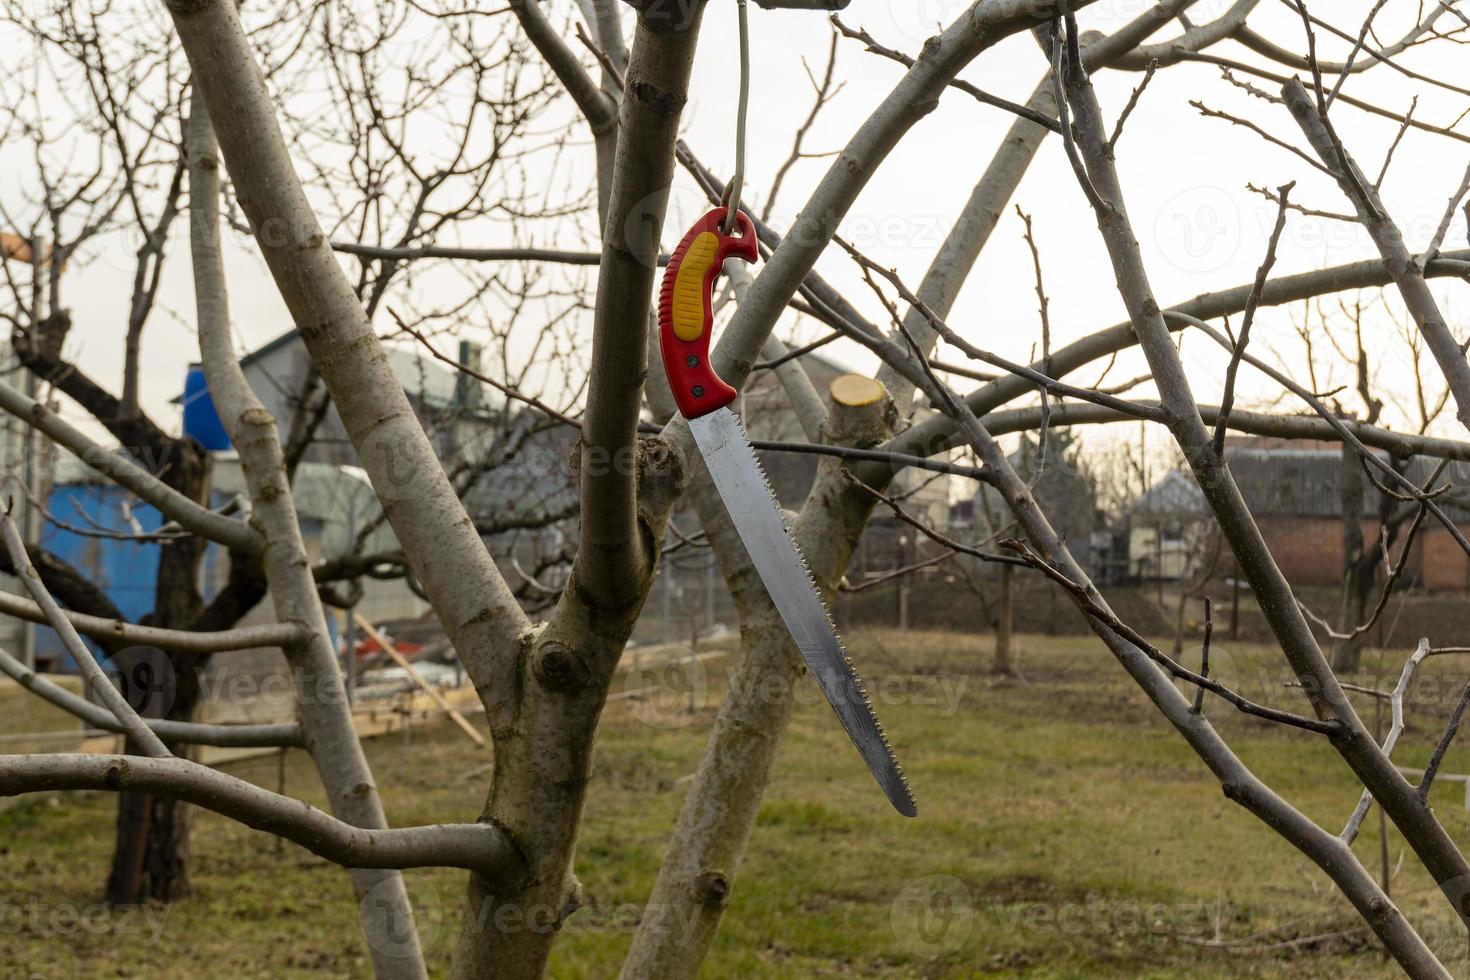 An agricultural tool, a saw hanging on a tree branch after pruning. photo